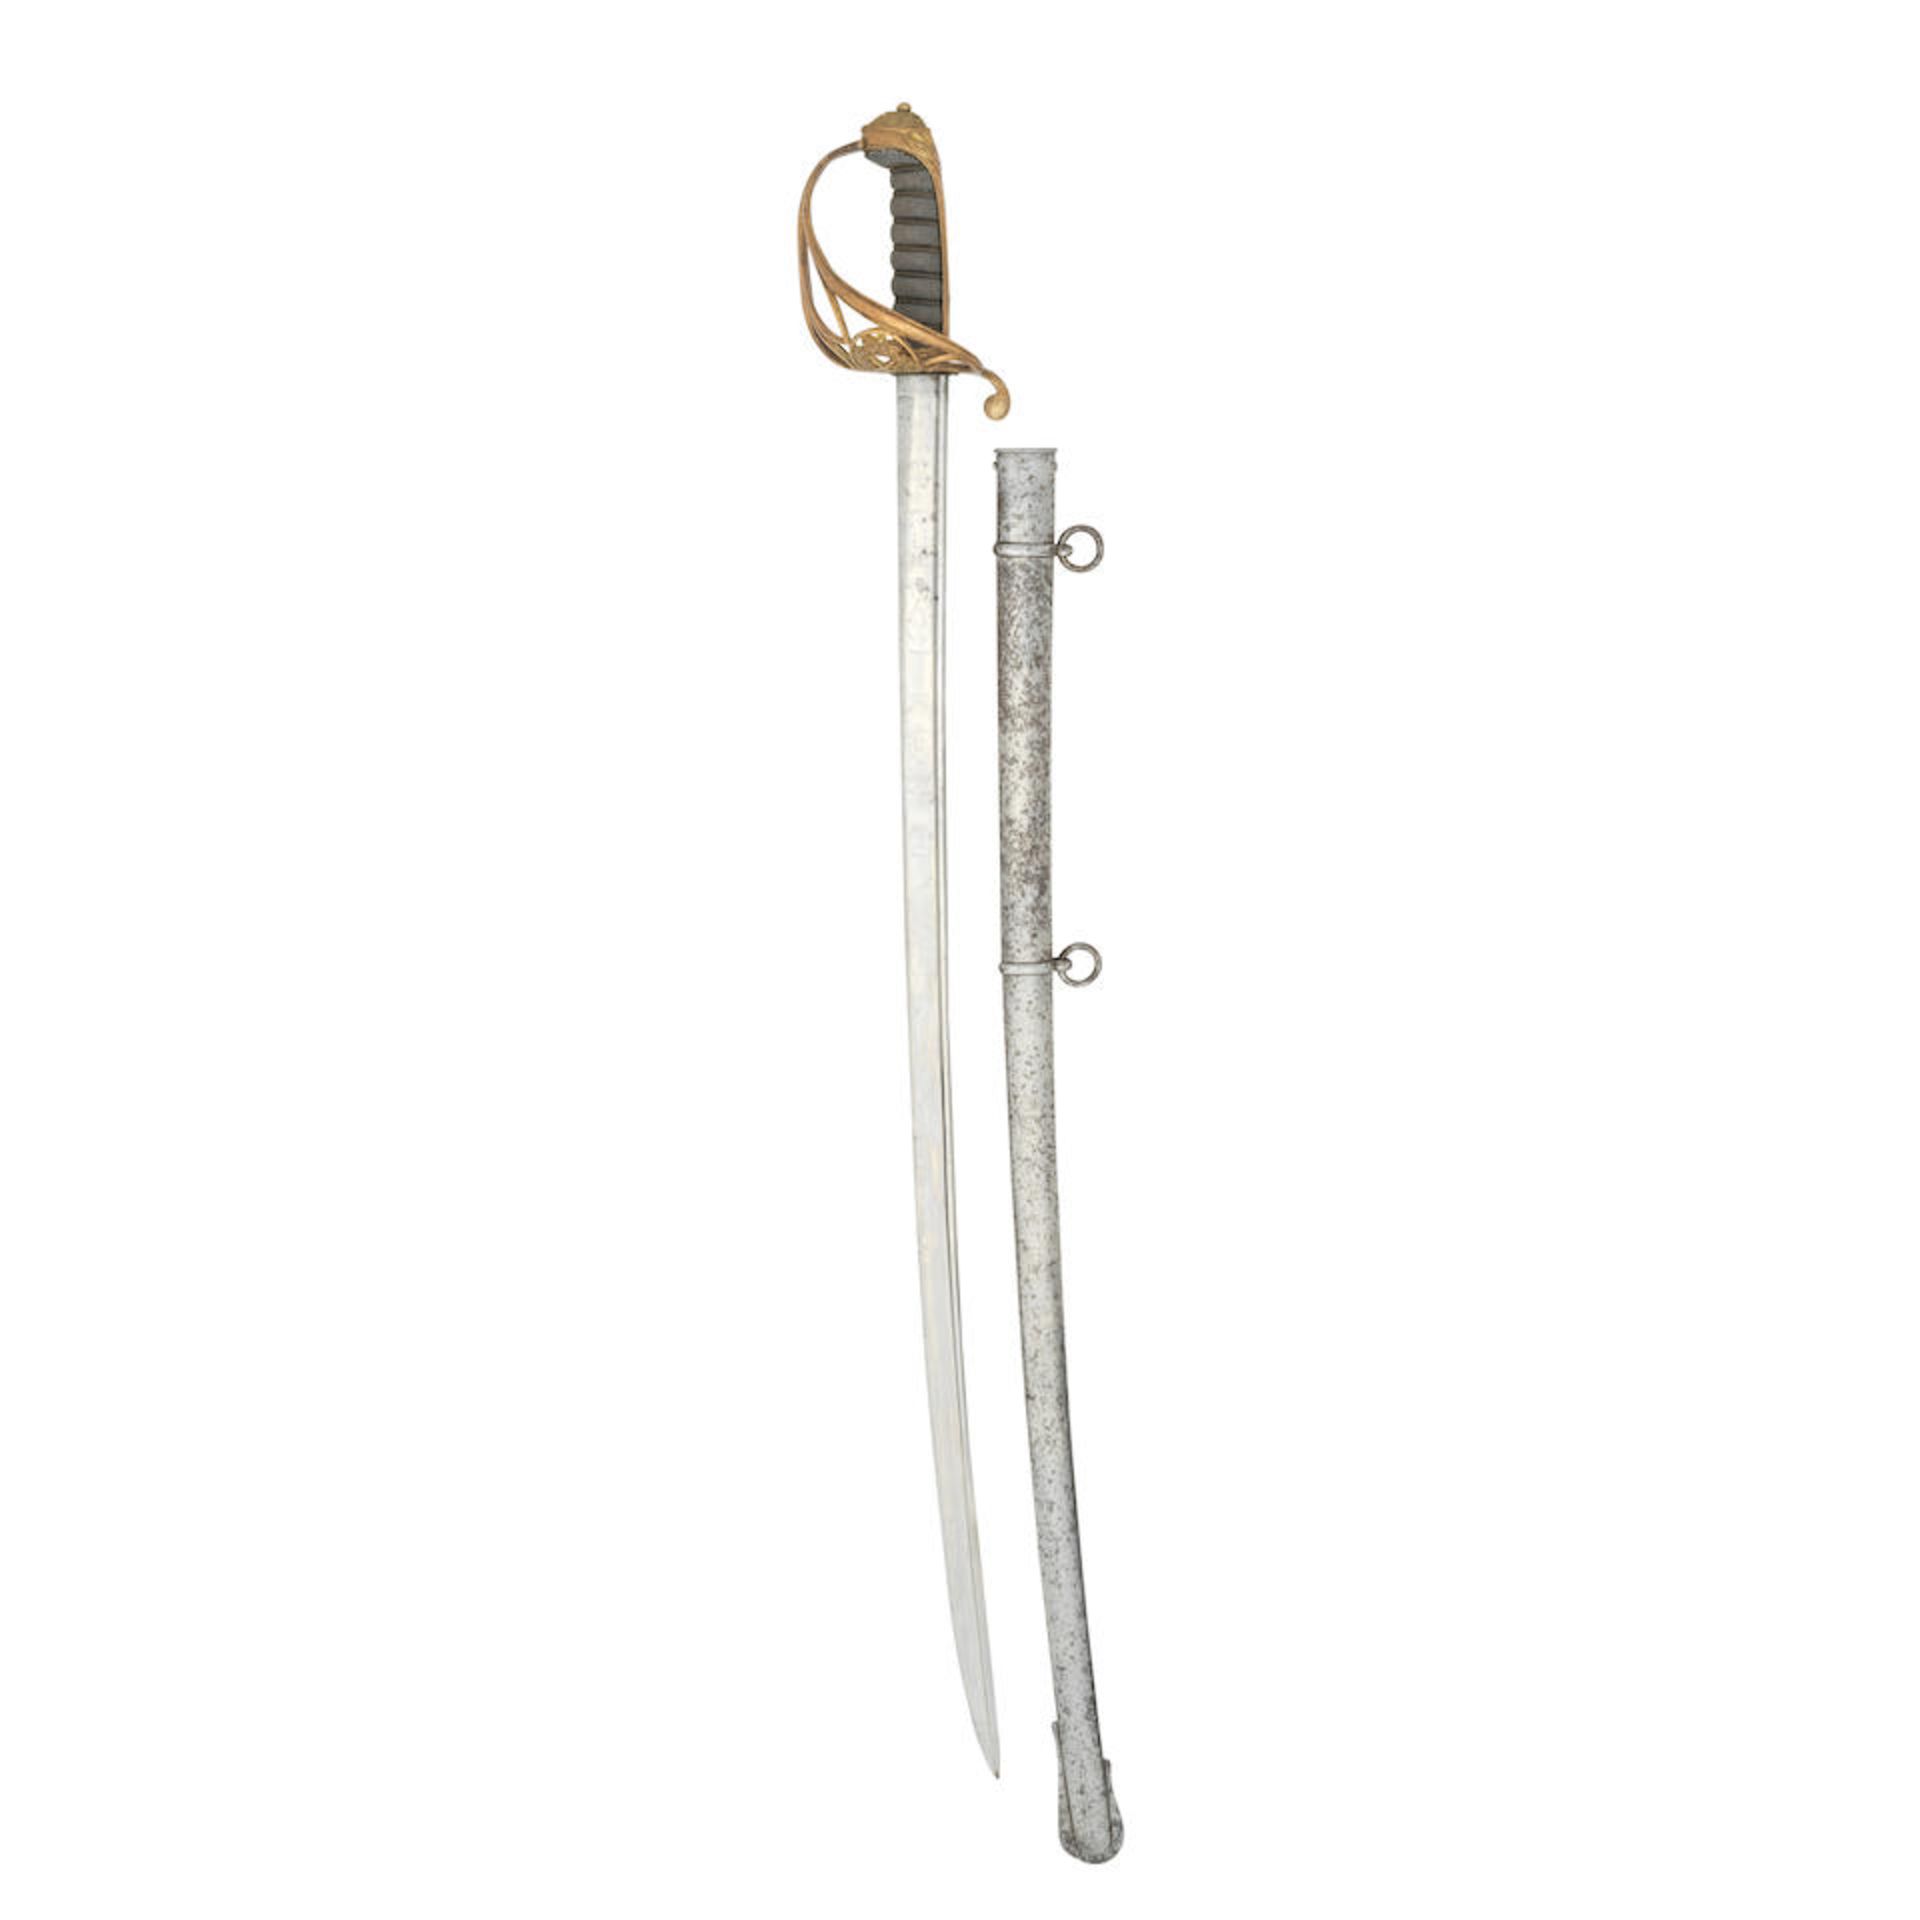 An 1822 Pattern East India Company General Officer's Sword